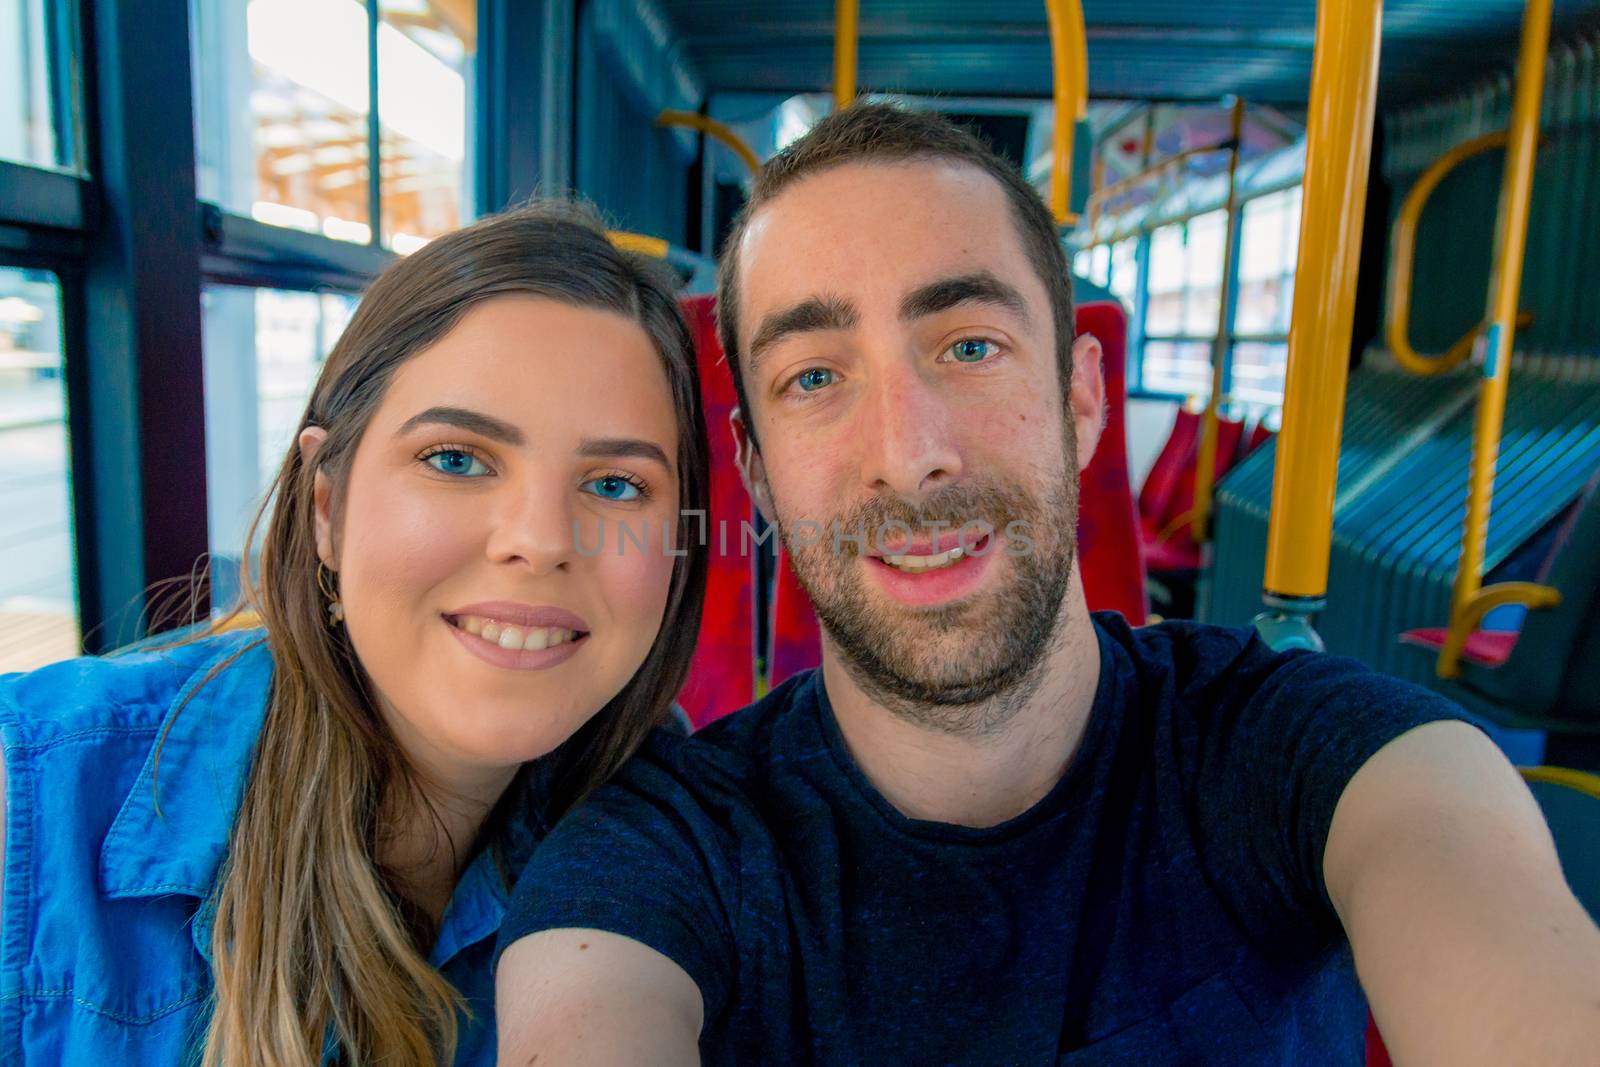 Happy couple taking a selfie with smartphone or camera inside a city bus.